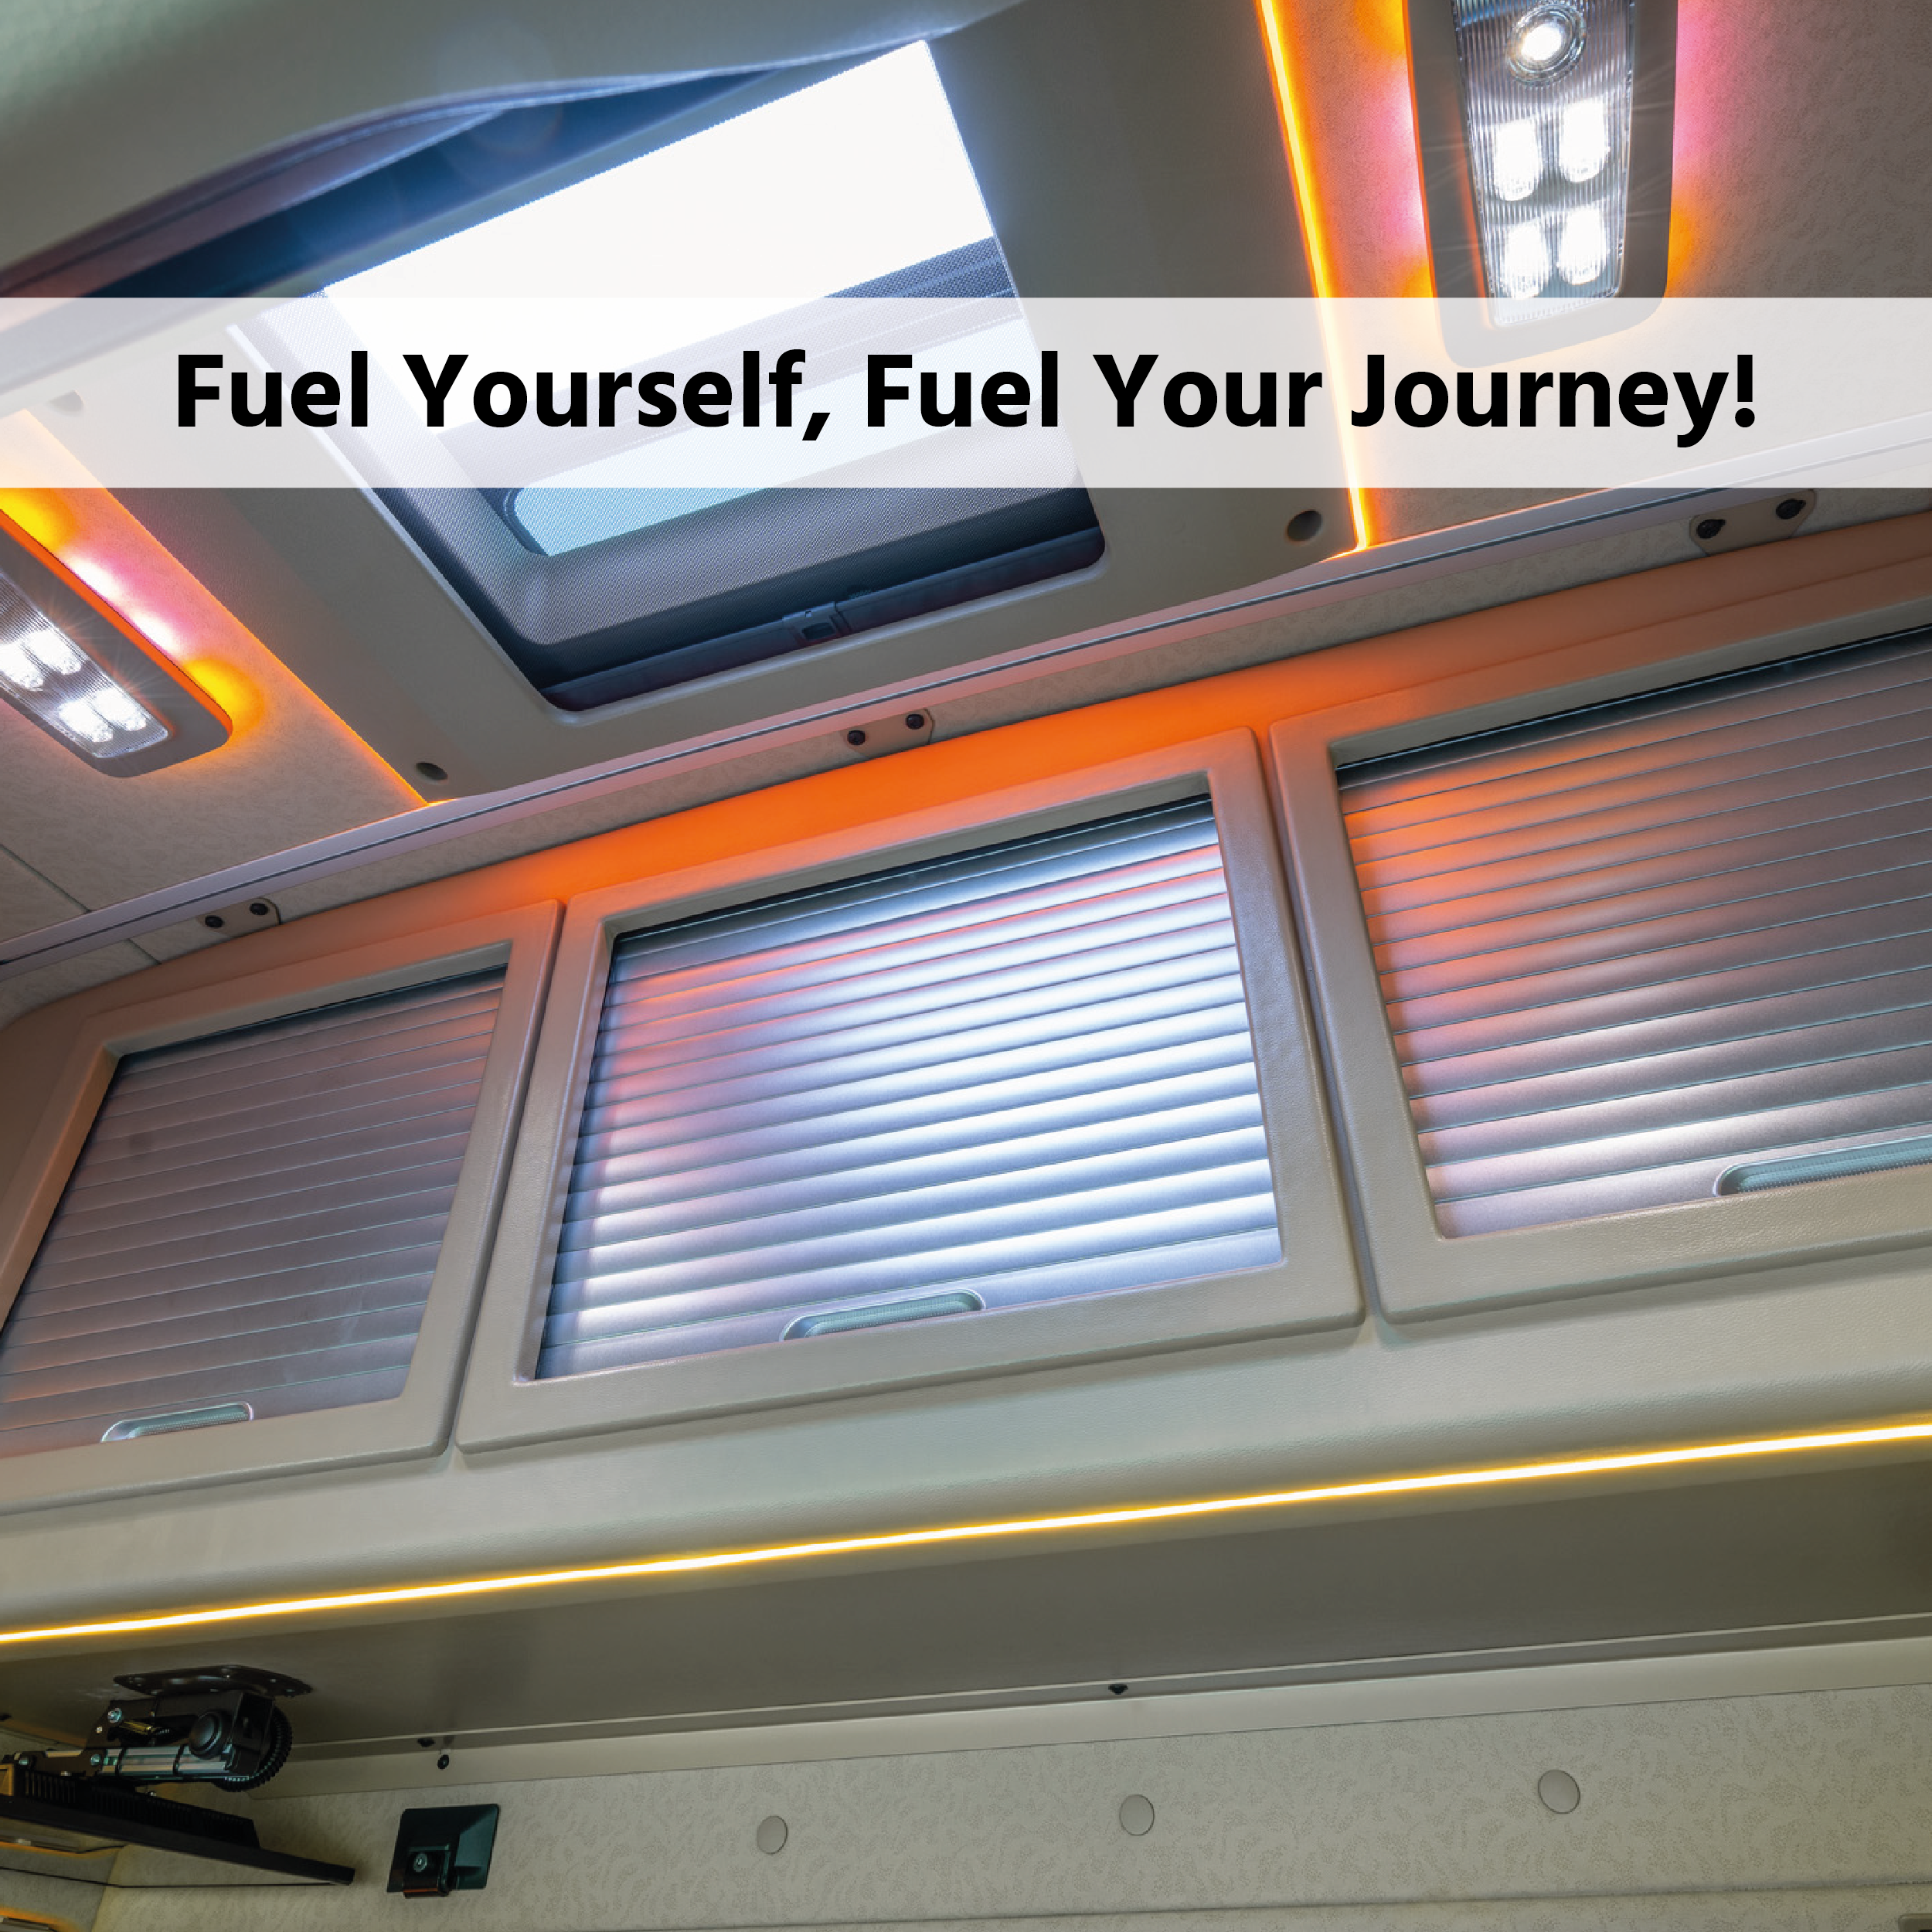 Fuel Yourself, Fuel Your Journey!